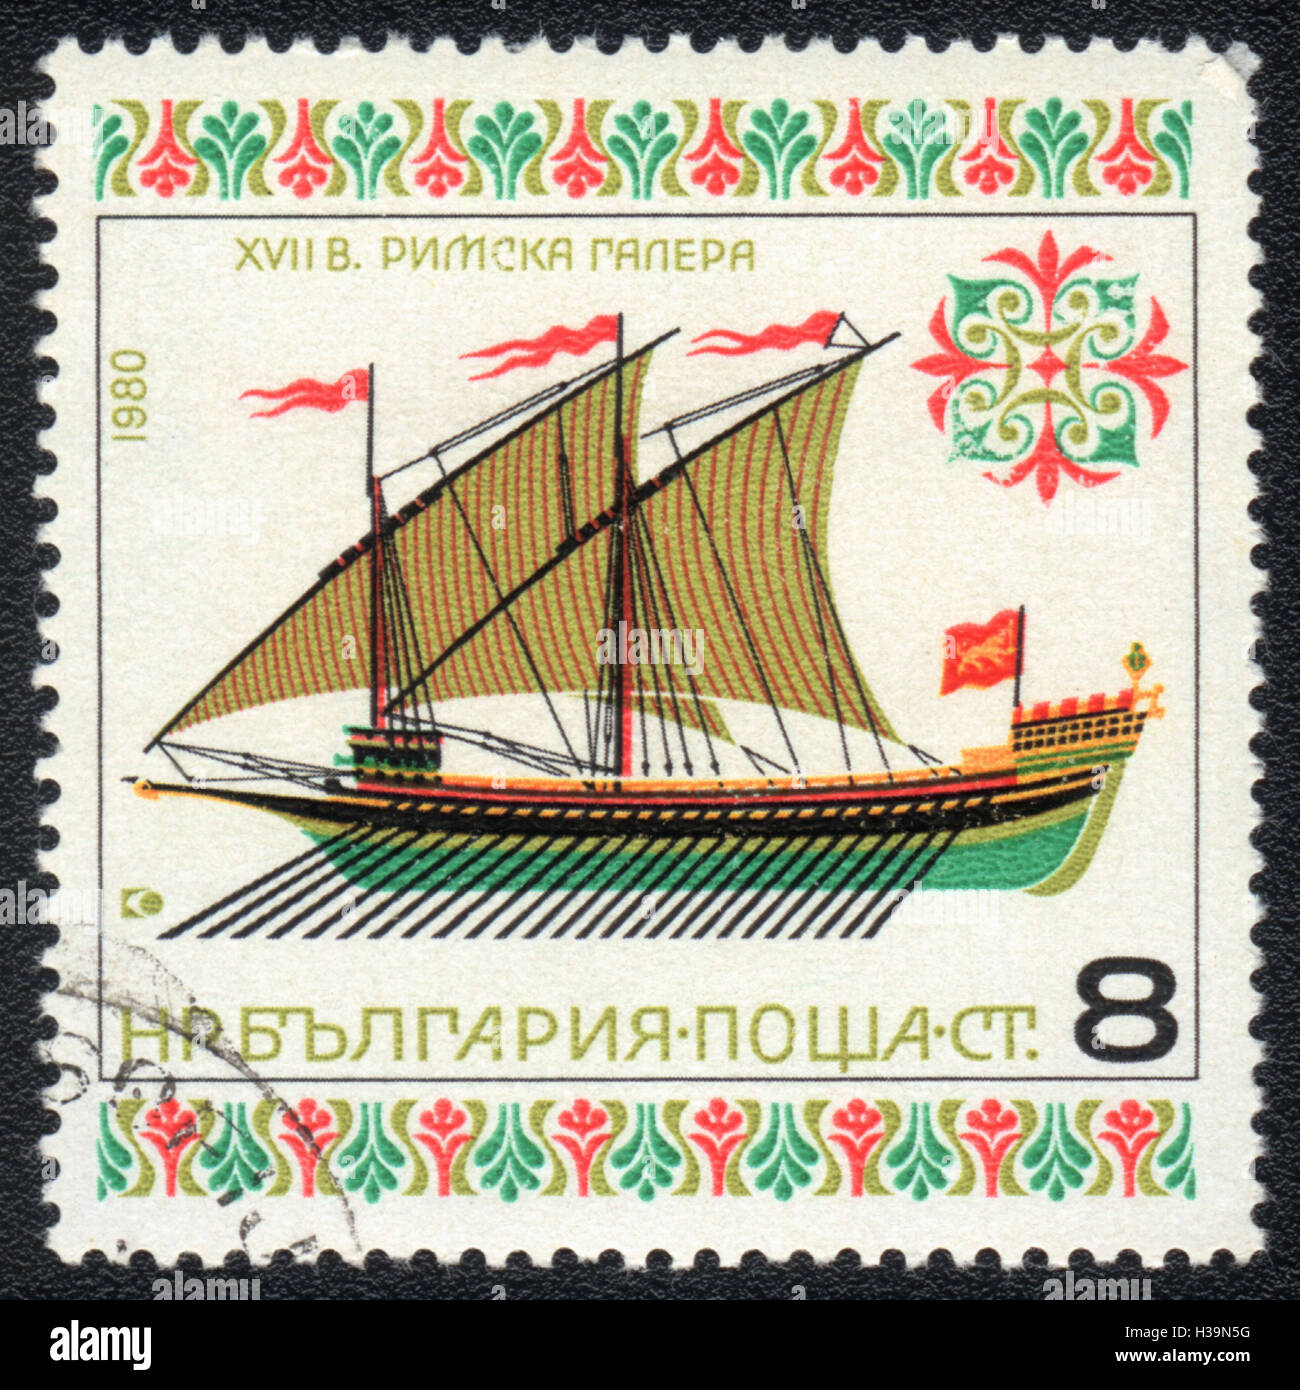 A postage stamp printed in Bulgaria shows Roman galley 17 century, circa 1980 Stock Photo